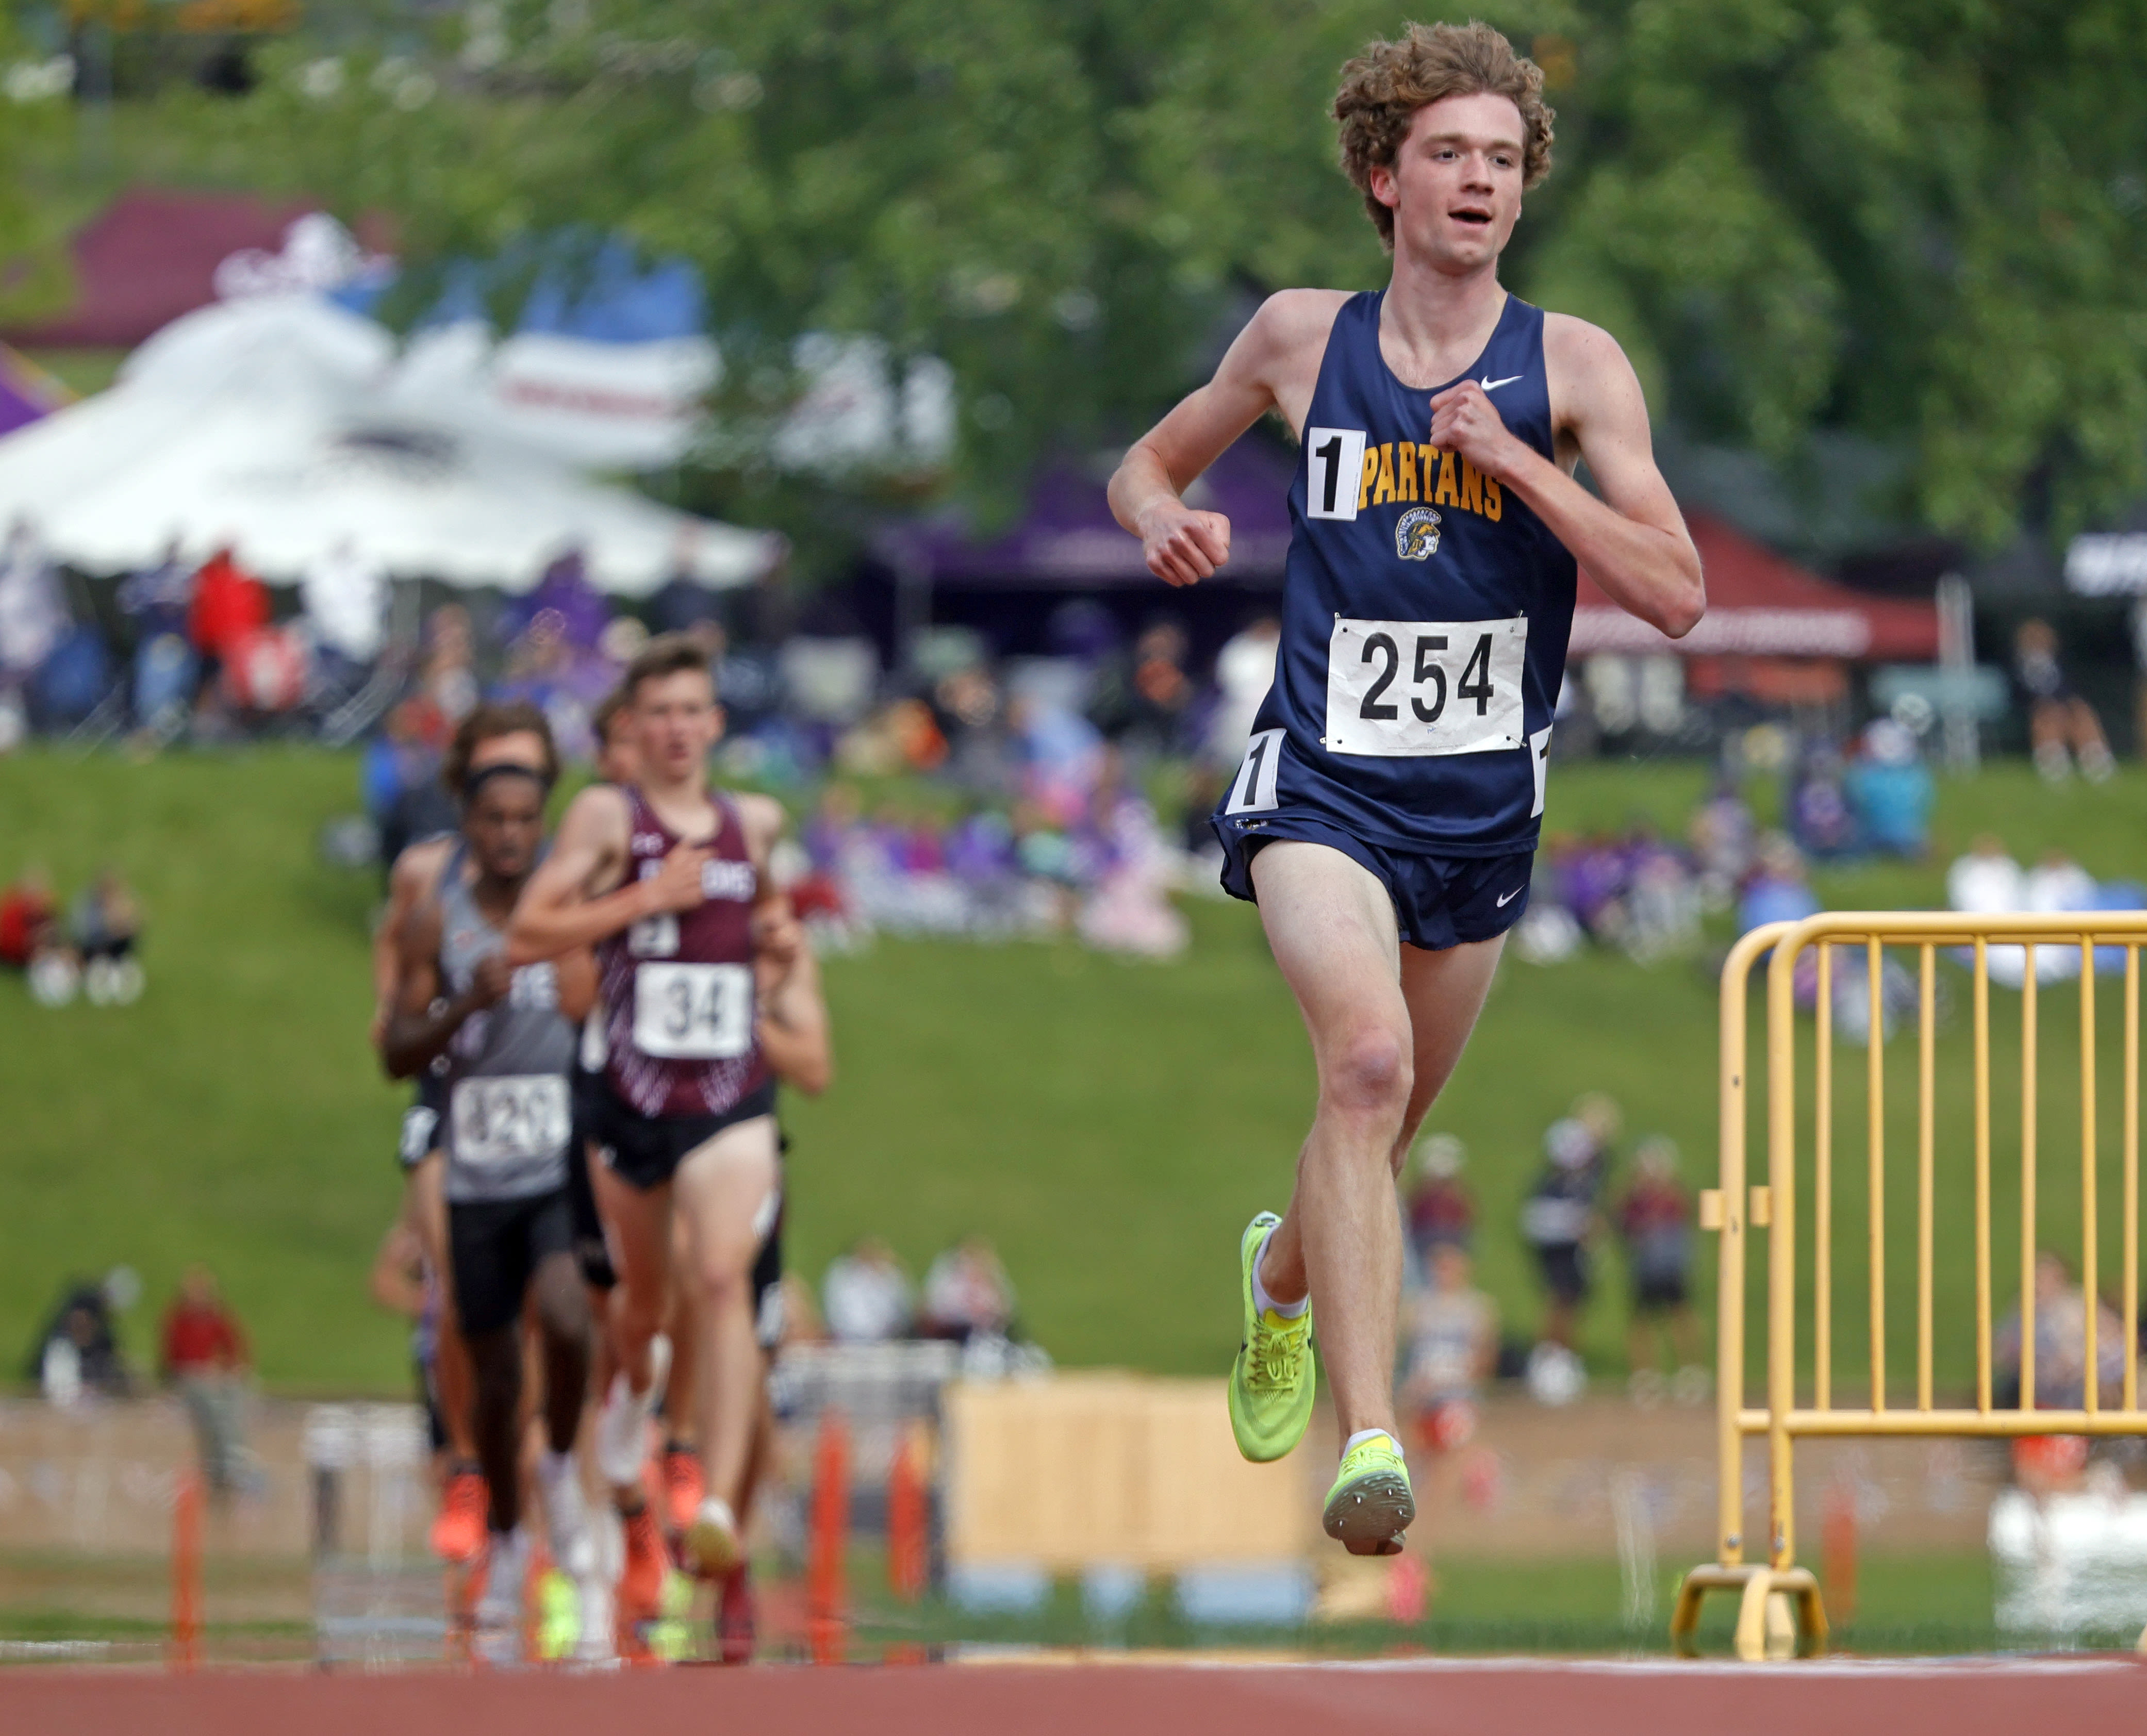 Fargo North's Owen Sondag, Fargo South's Wren James earn individual wins on Day 1 of ND Class A state track